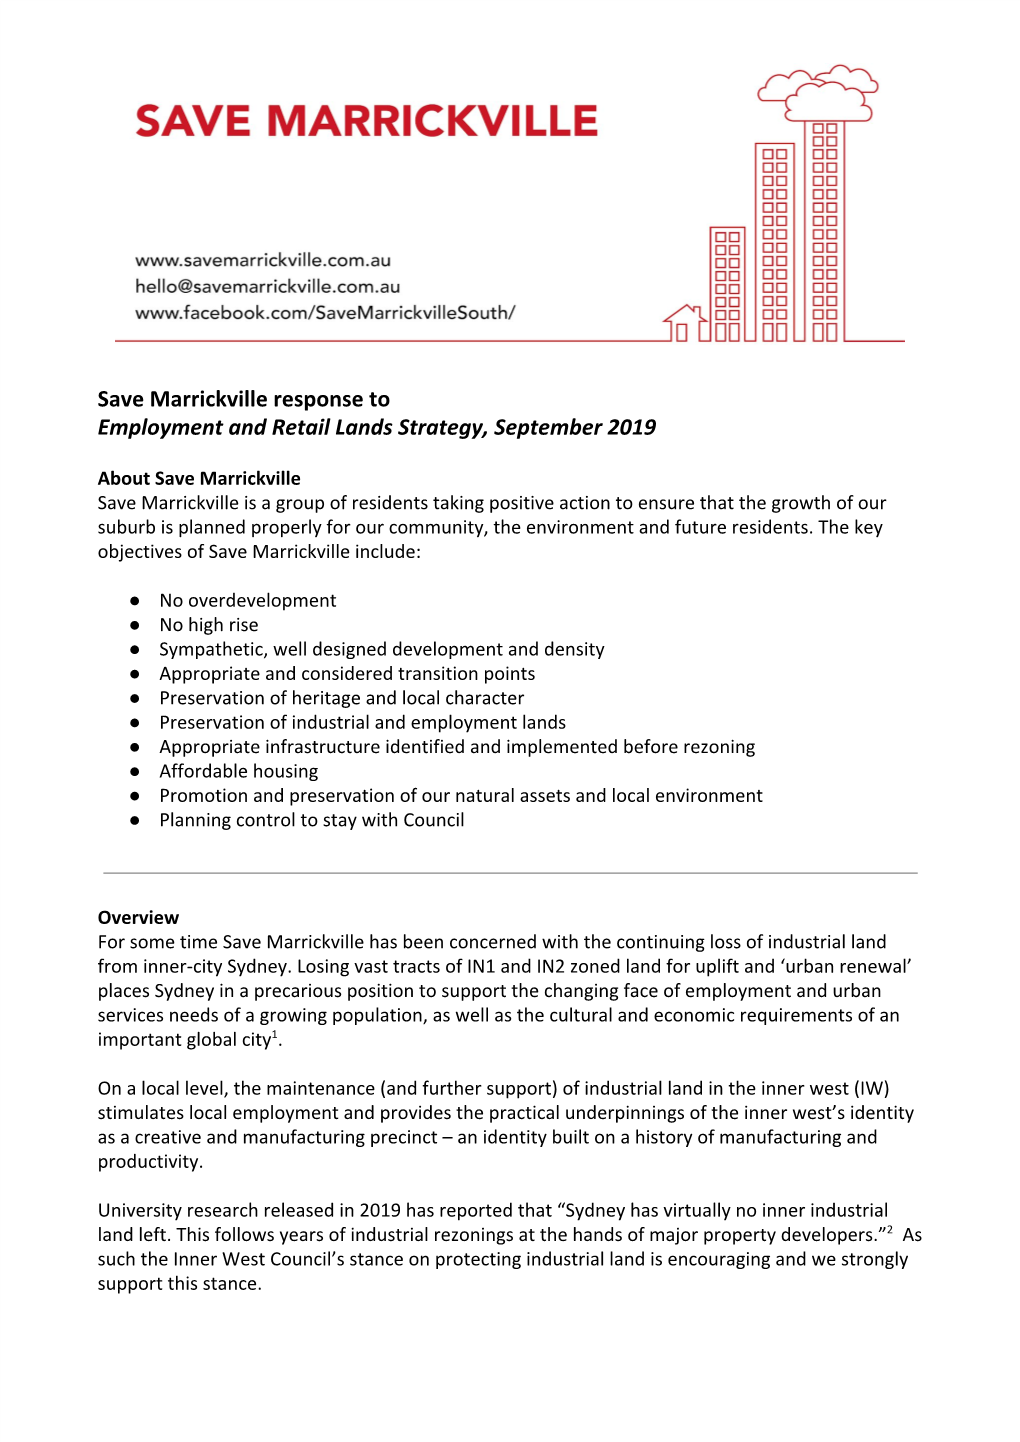 Save Marrickville Response to Employment and Retail Lands Strategy, September 2019